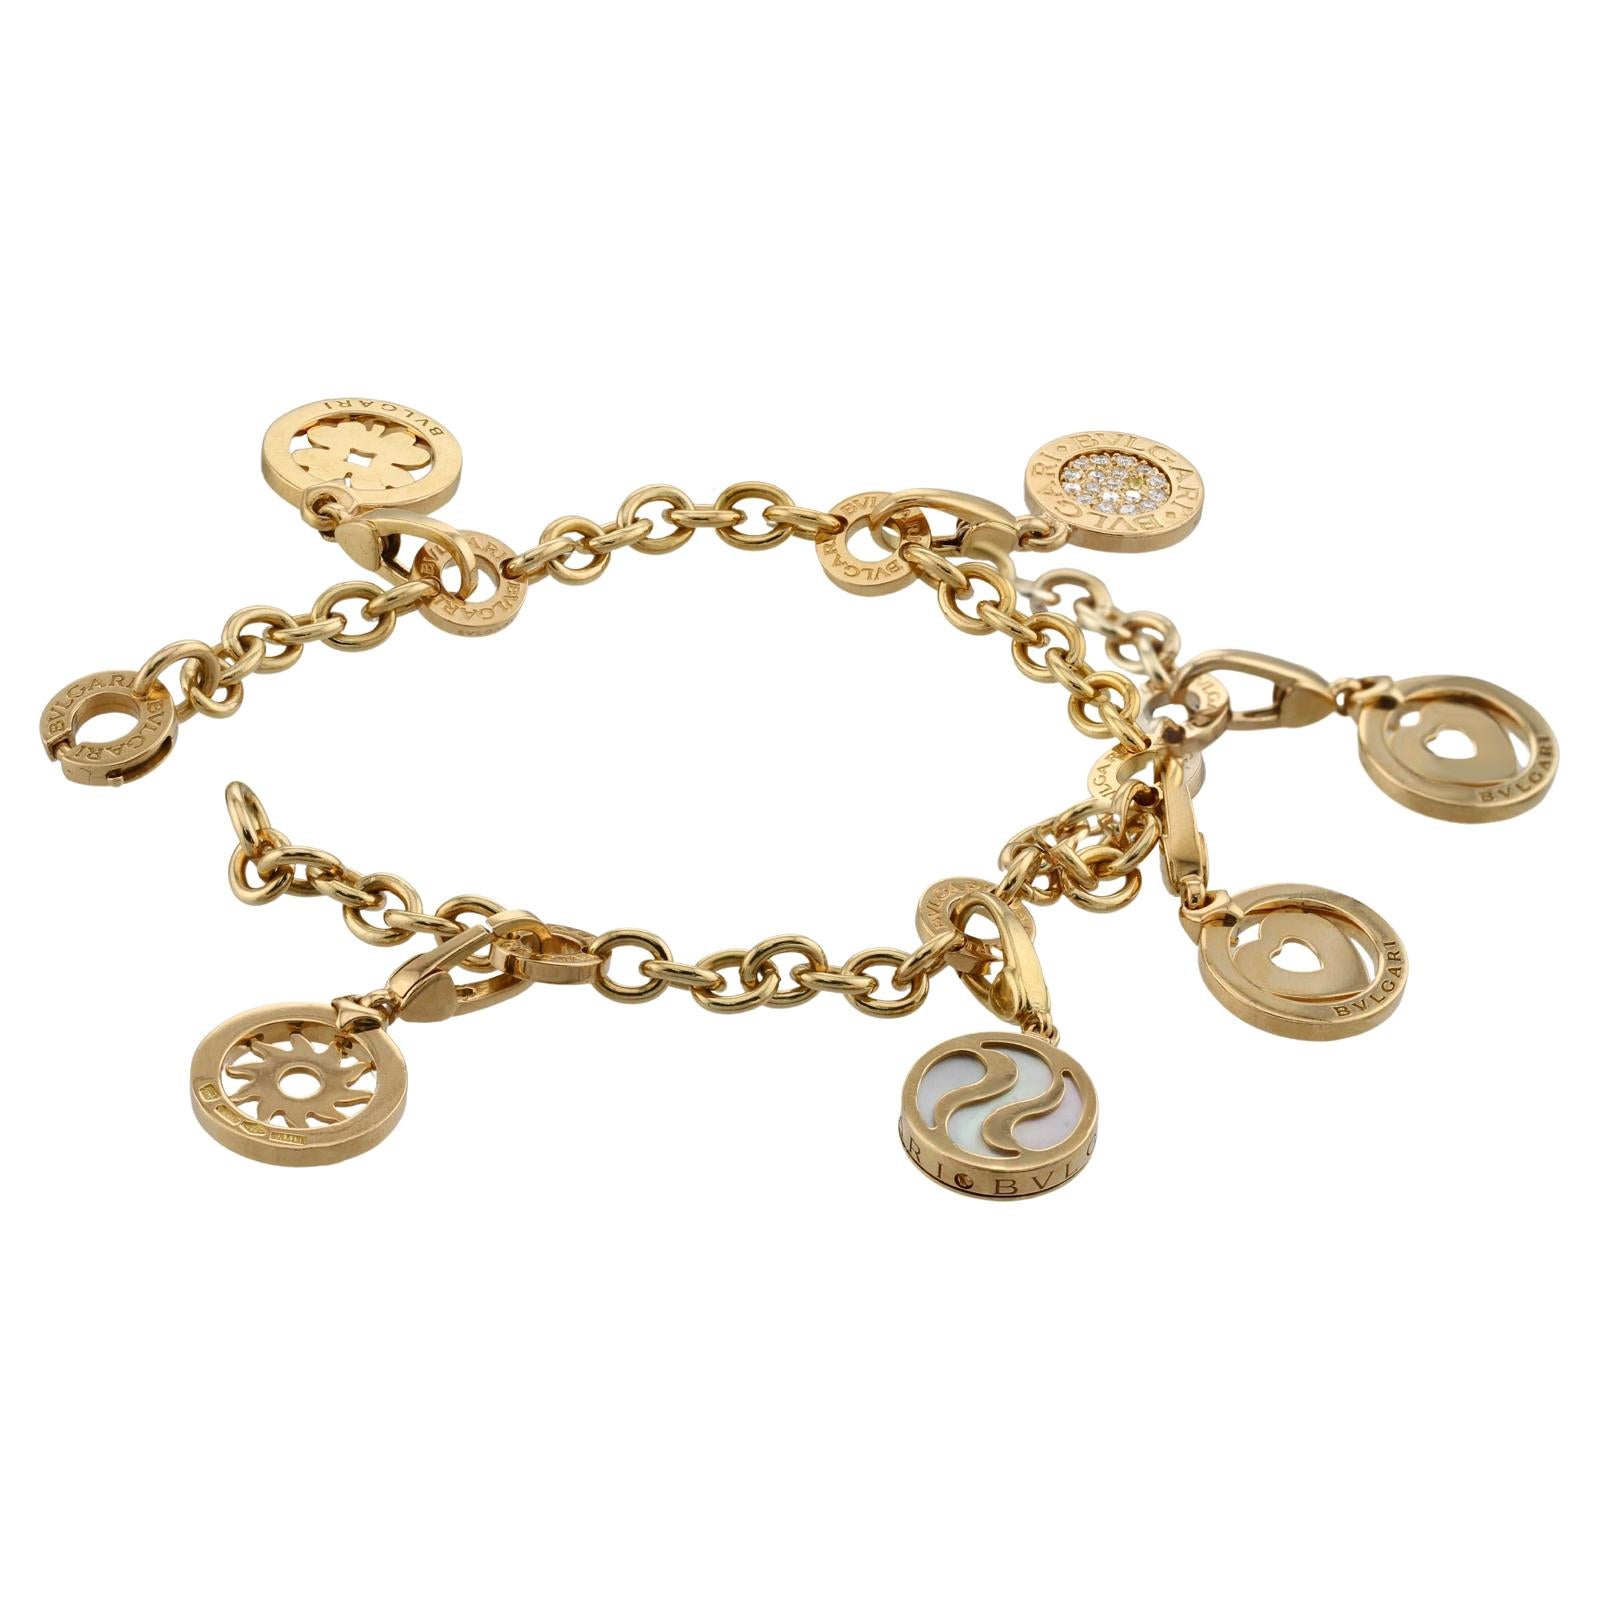 This gorgeous Bvlgari bracelet is crafted in 18 yellow gold and features 5 round charms, consisting of a heart, clover, sun, a mother-of-pearl circle and a paved E-F-G        VVS1-VVS2 diamonds circle. Each charm is inscribed with the Bvlgari logo.